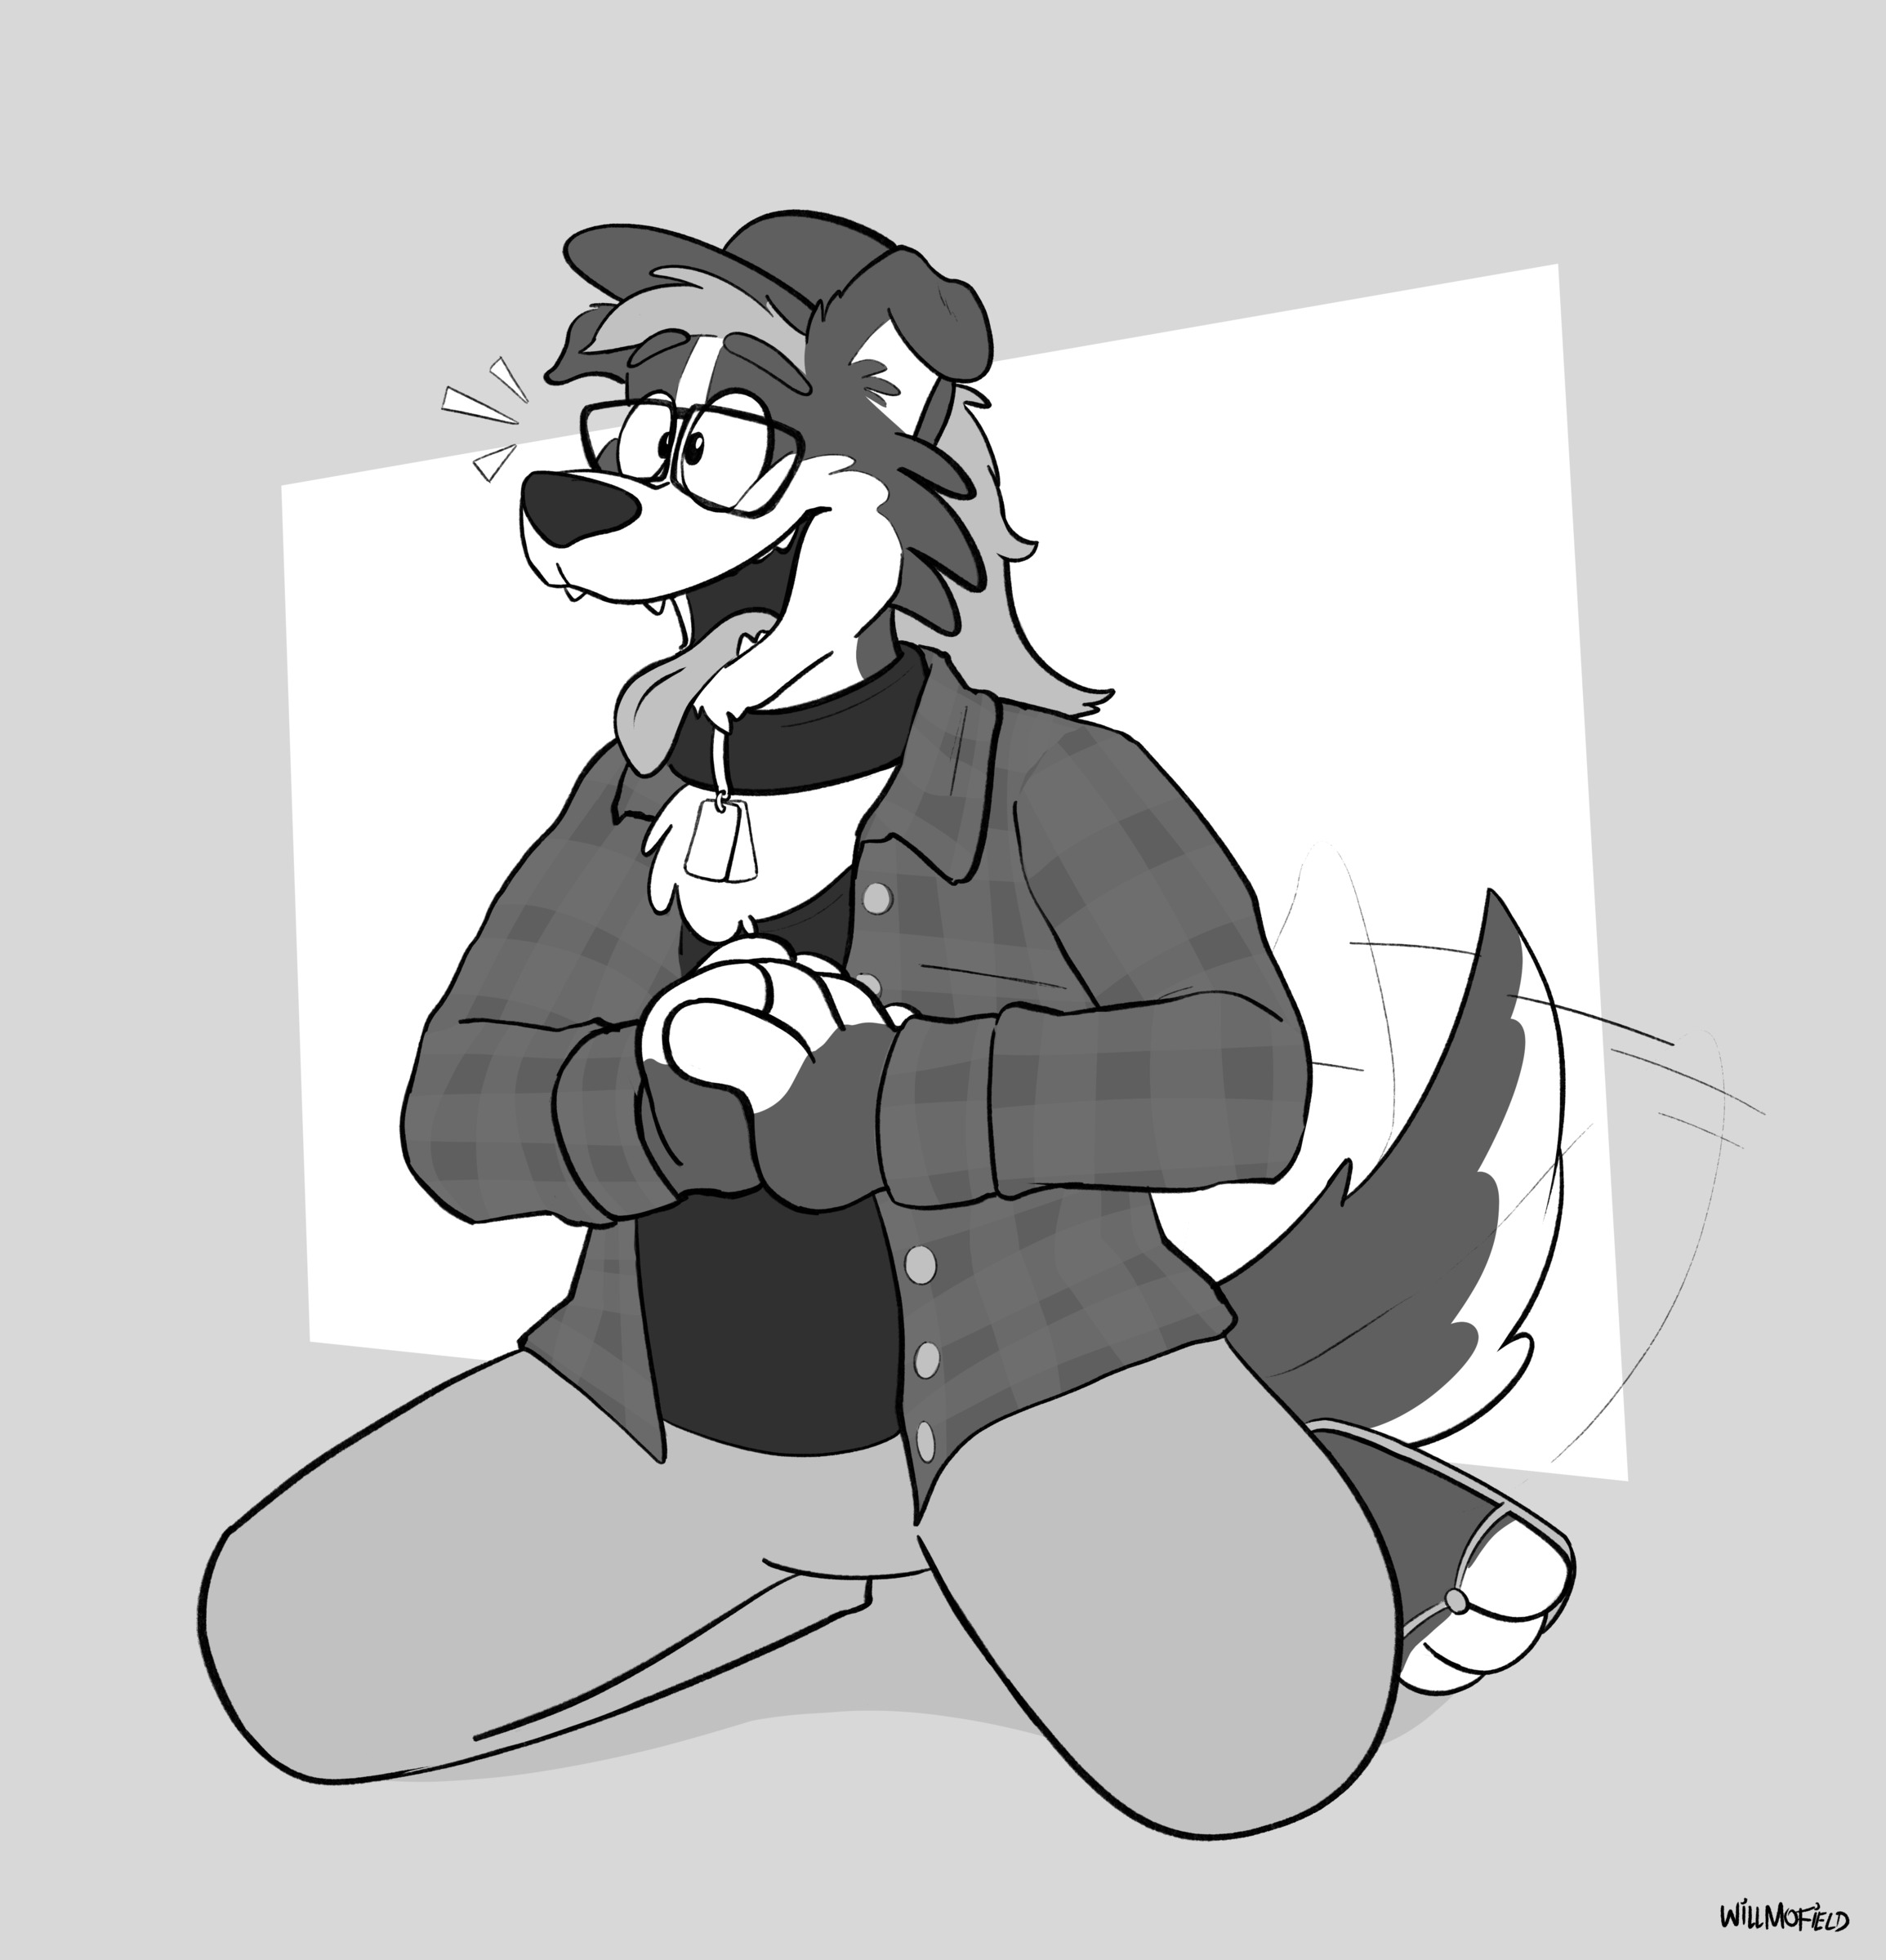 A long-haired anthropomorphic border collie wearing glasses, a baseball hat and cool outfit. The collie is wagging and smiling, tongue hanging out.